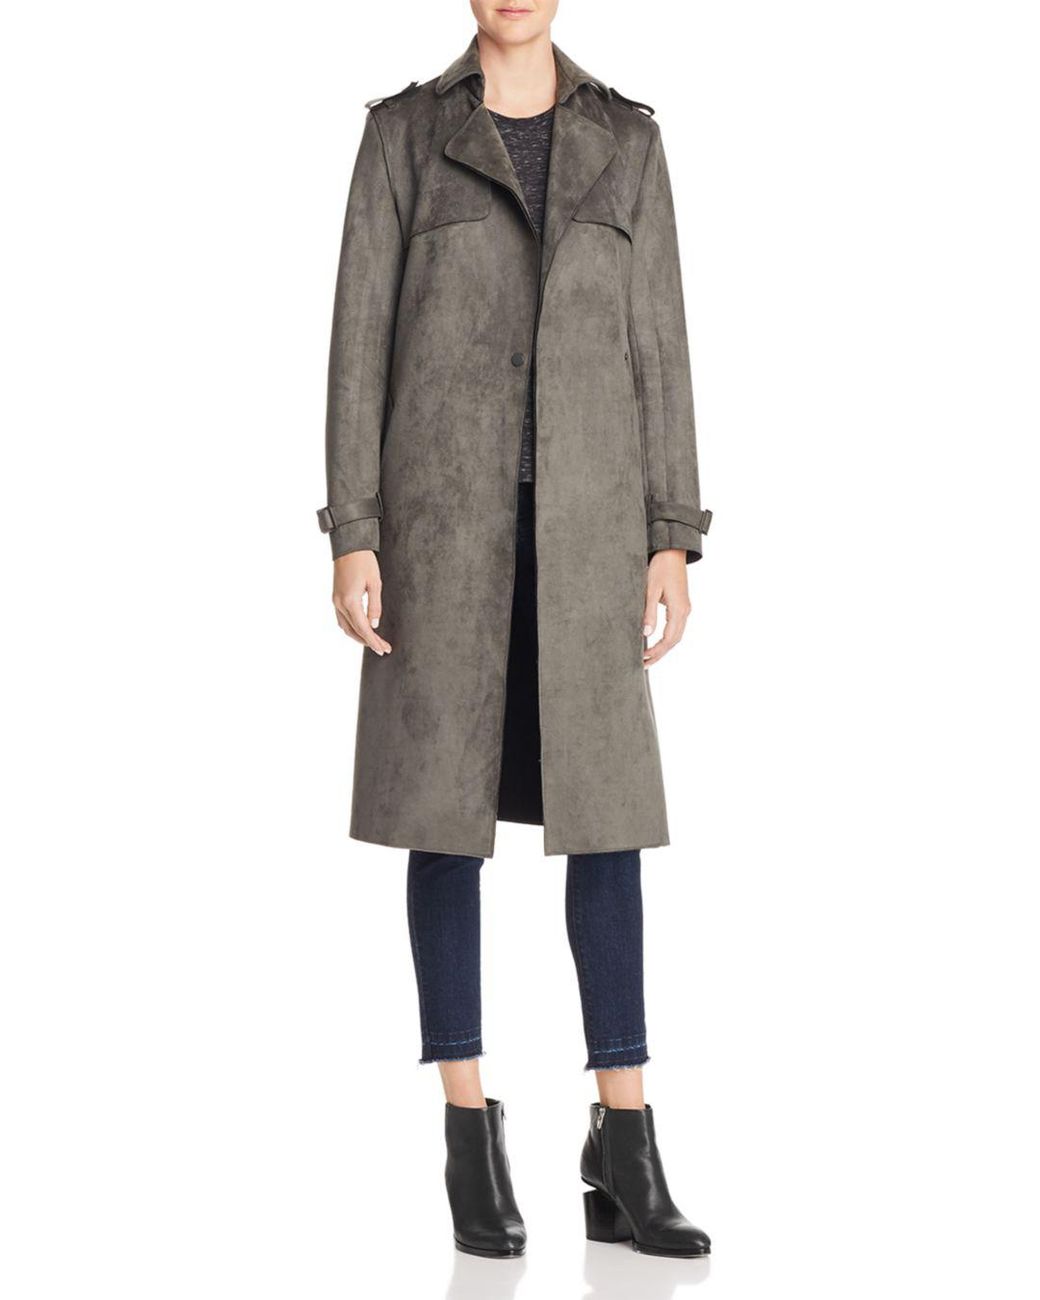 T Tahari Faux Suede Trench Coat in Olive (Green) - Lyst